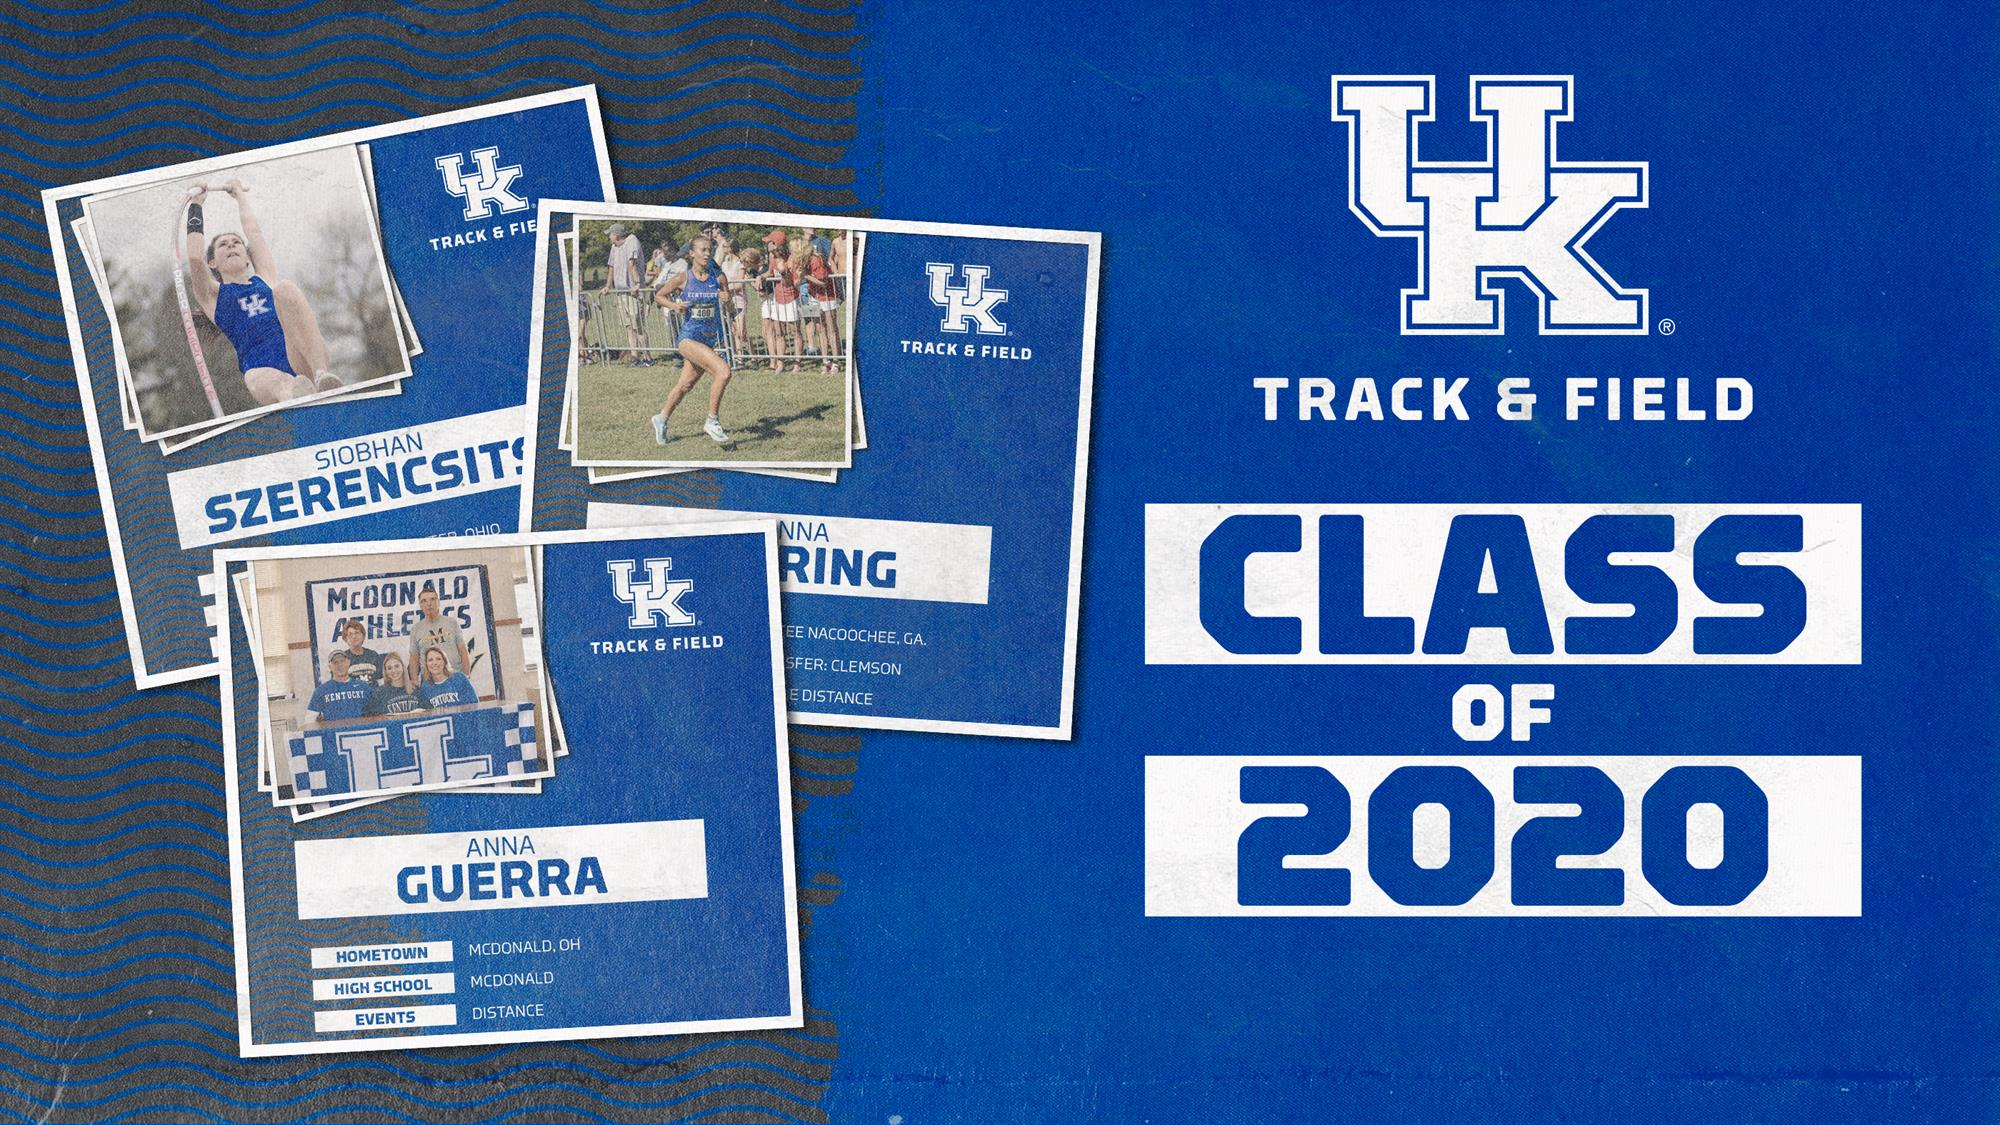 UKTF Adds Three Additions in Late Summer 2020